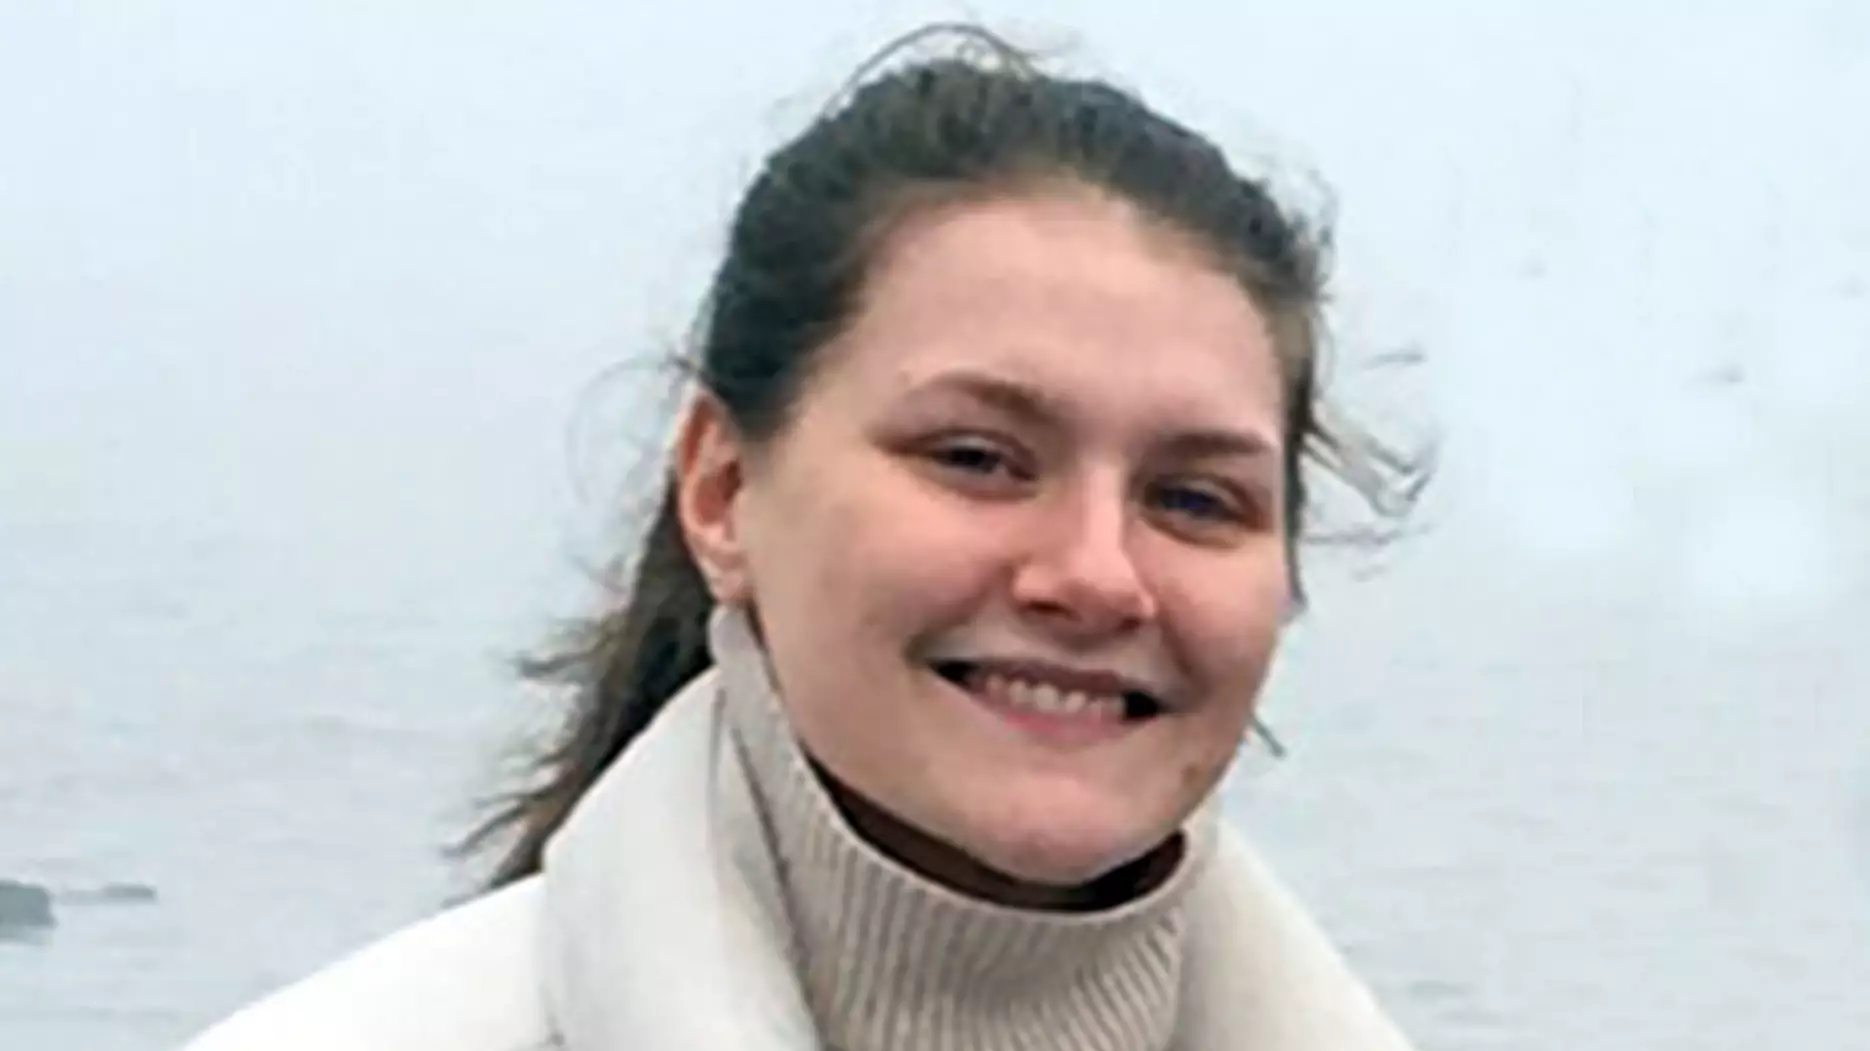 Pawel Relowicz Sentenced To Life In Jail For The Rape And Murder Of Libby Squire